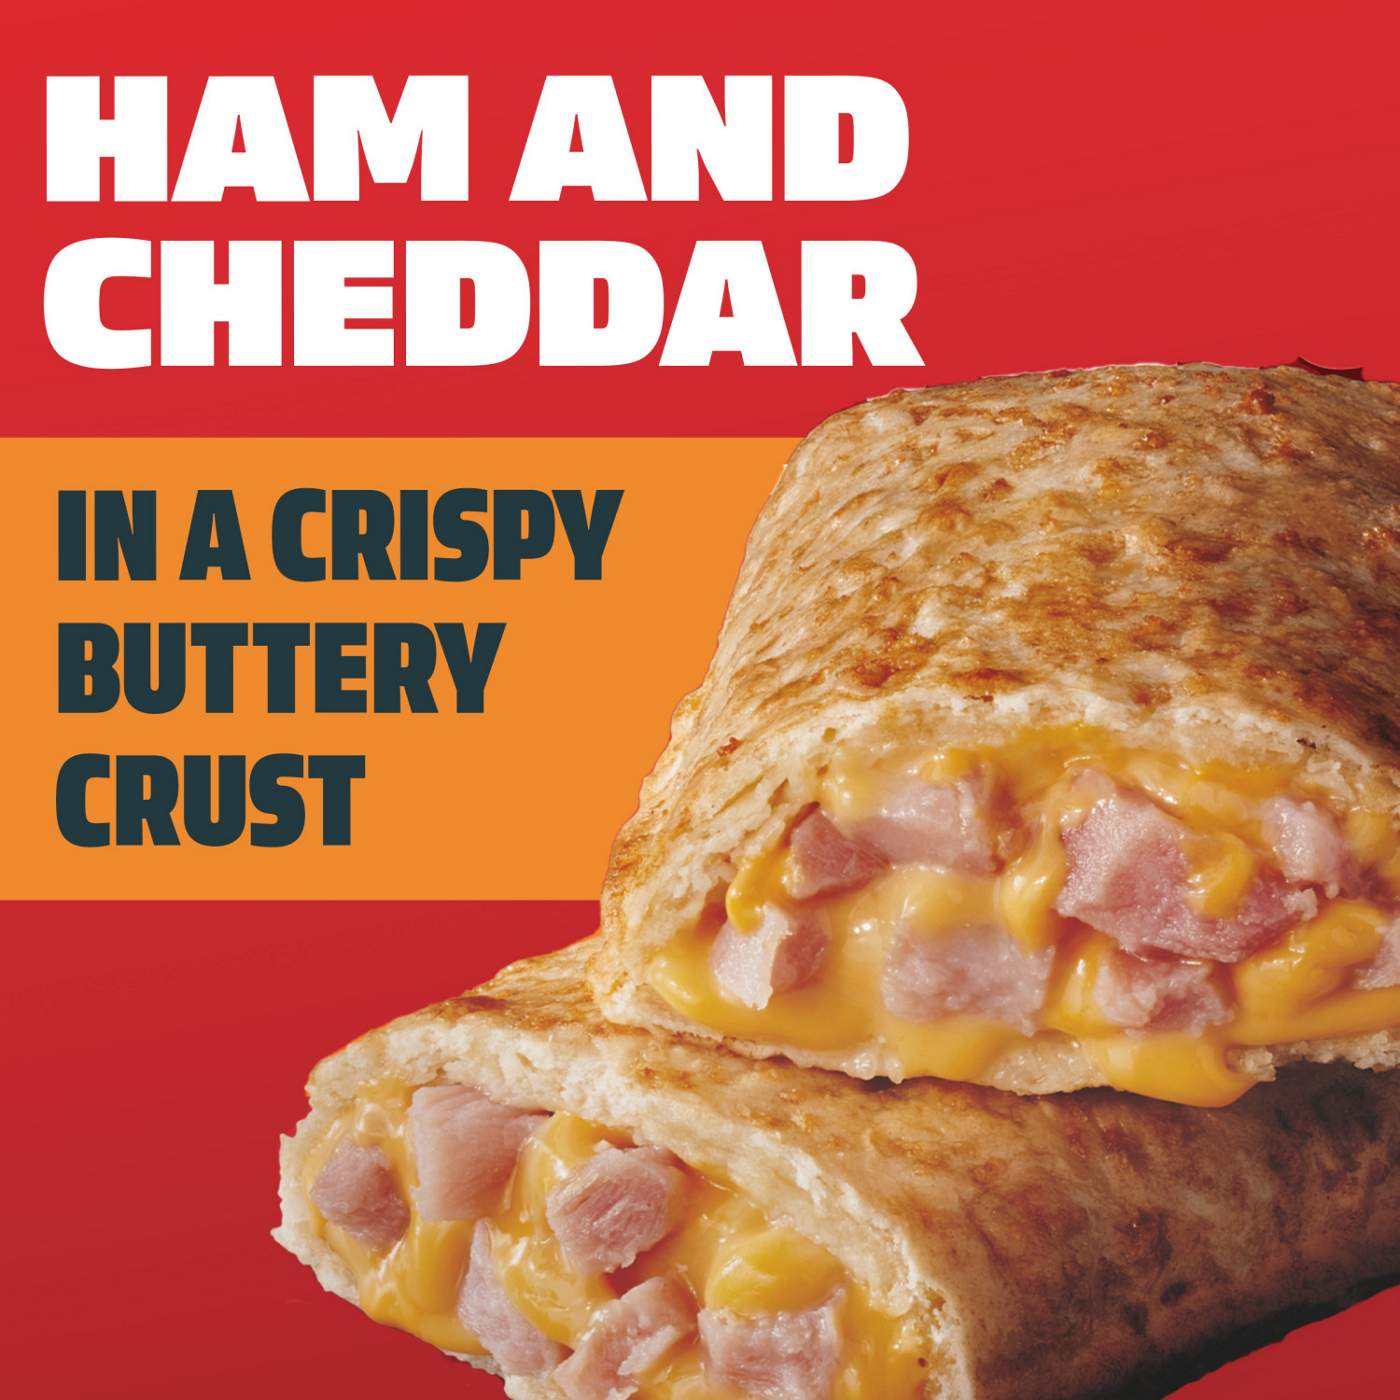 Hot Pockets Hickory Ham & Cheddar Frozen Sandwiches - Crispy Buttery Crust; image 2 of 8